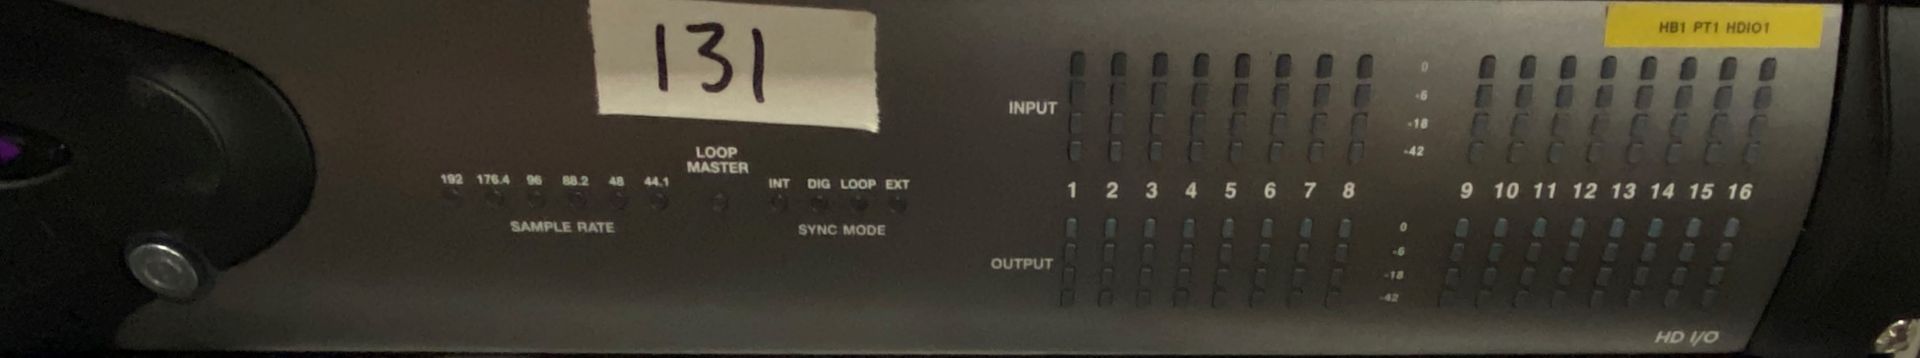 An Avid HD I/O 8x8x8 Audio Interface with Digital I/O Card (previously in use).